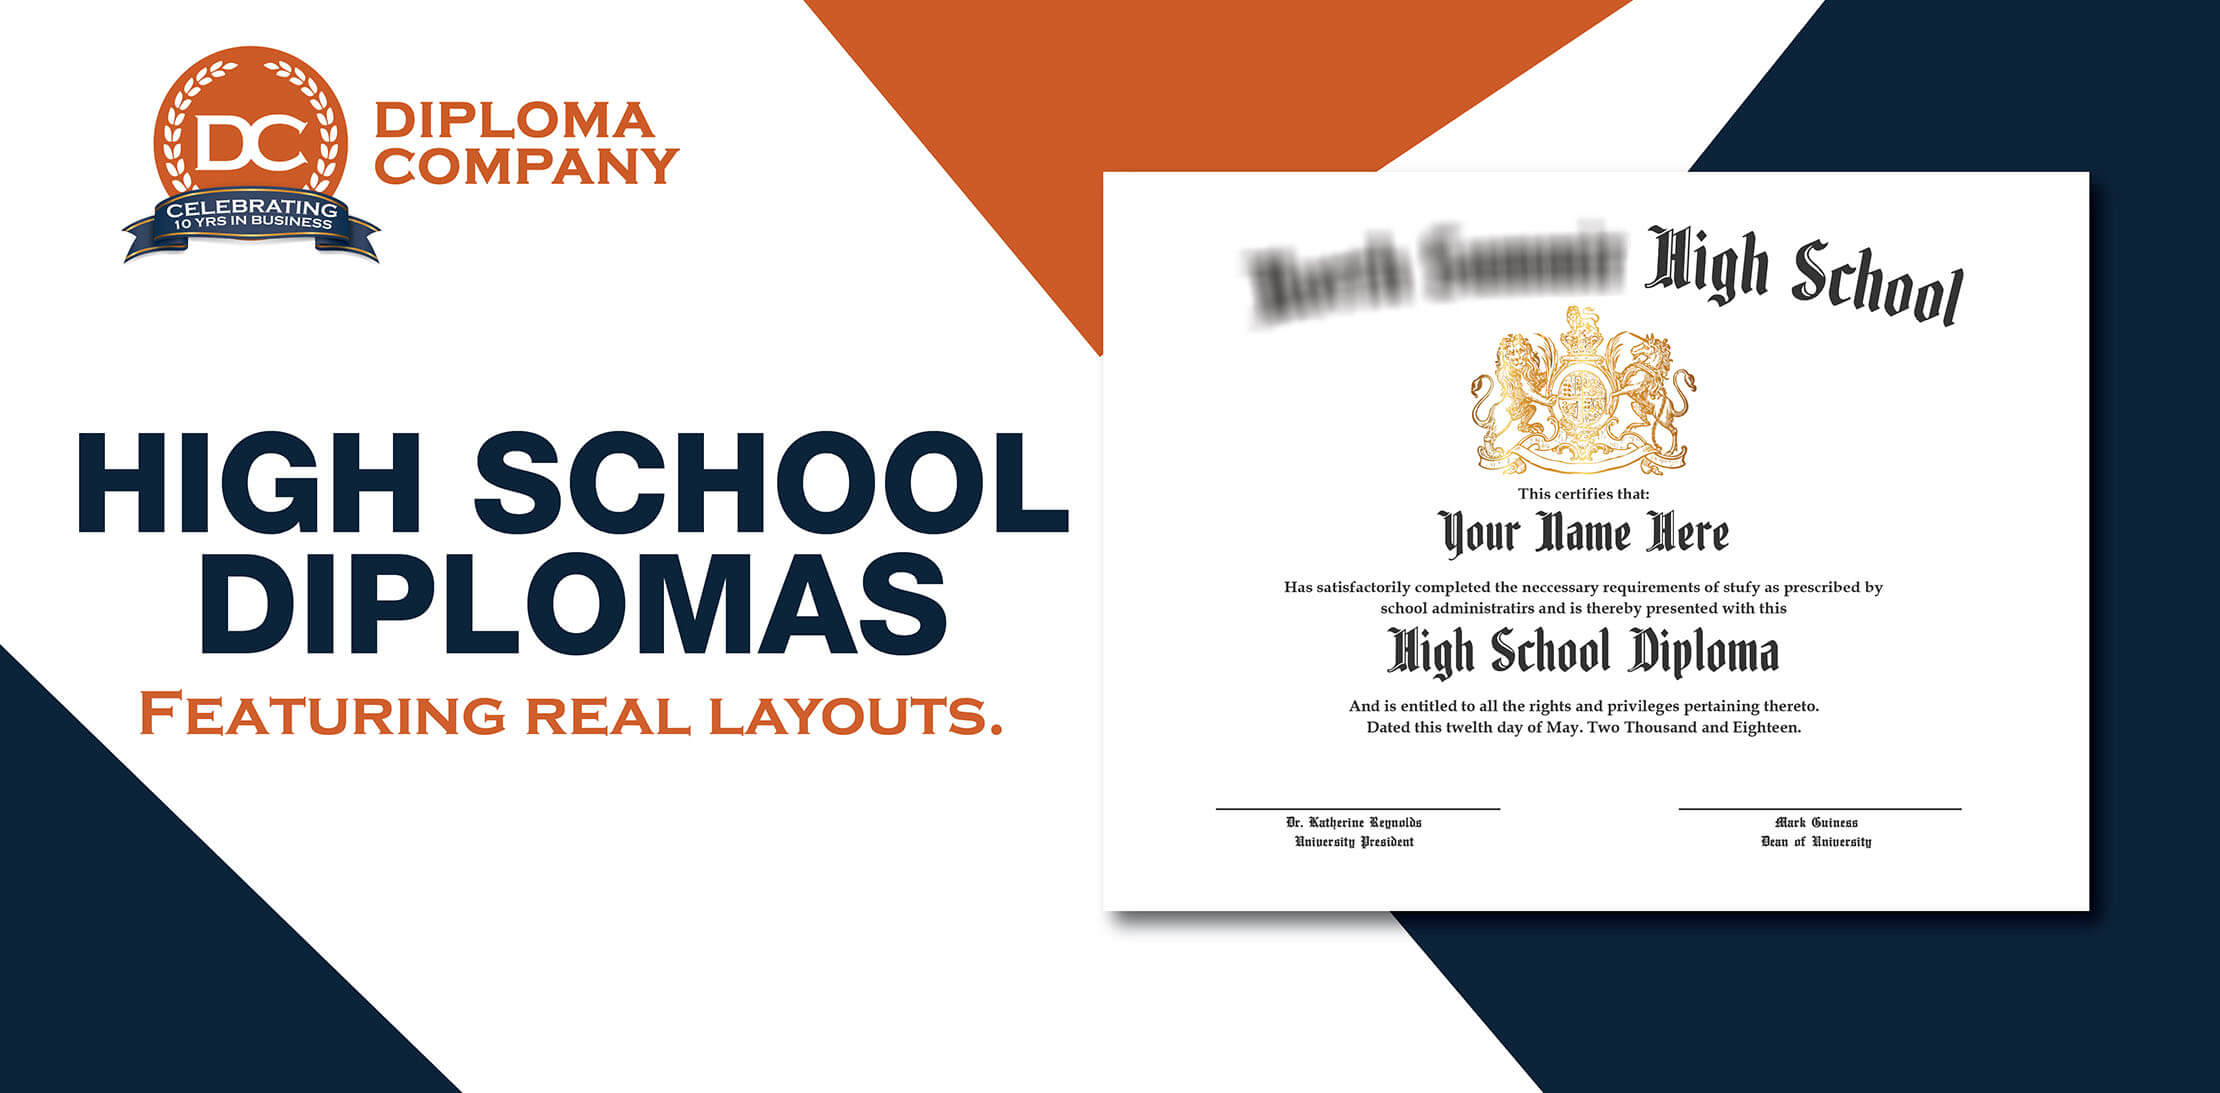 DiplomaCompany.com offers premium high school diplomas! Ships quick, free proofs, real hs and secondary school layouts, gold seals, and 100% guarantee!